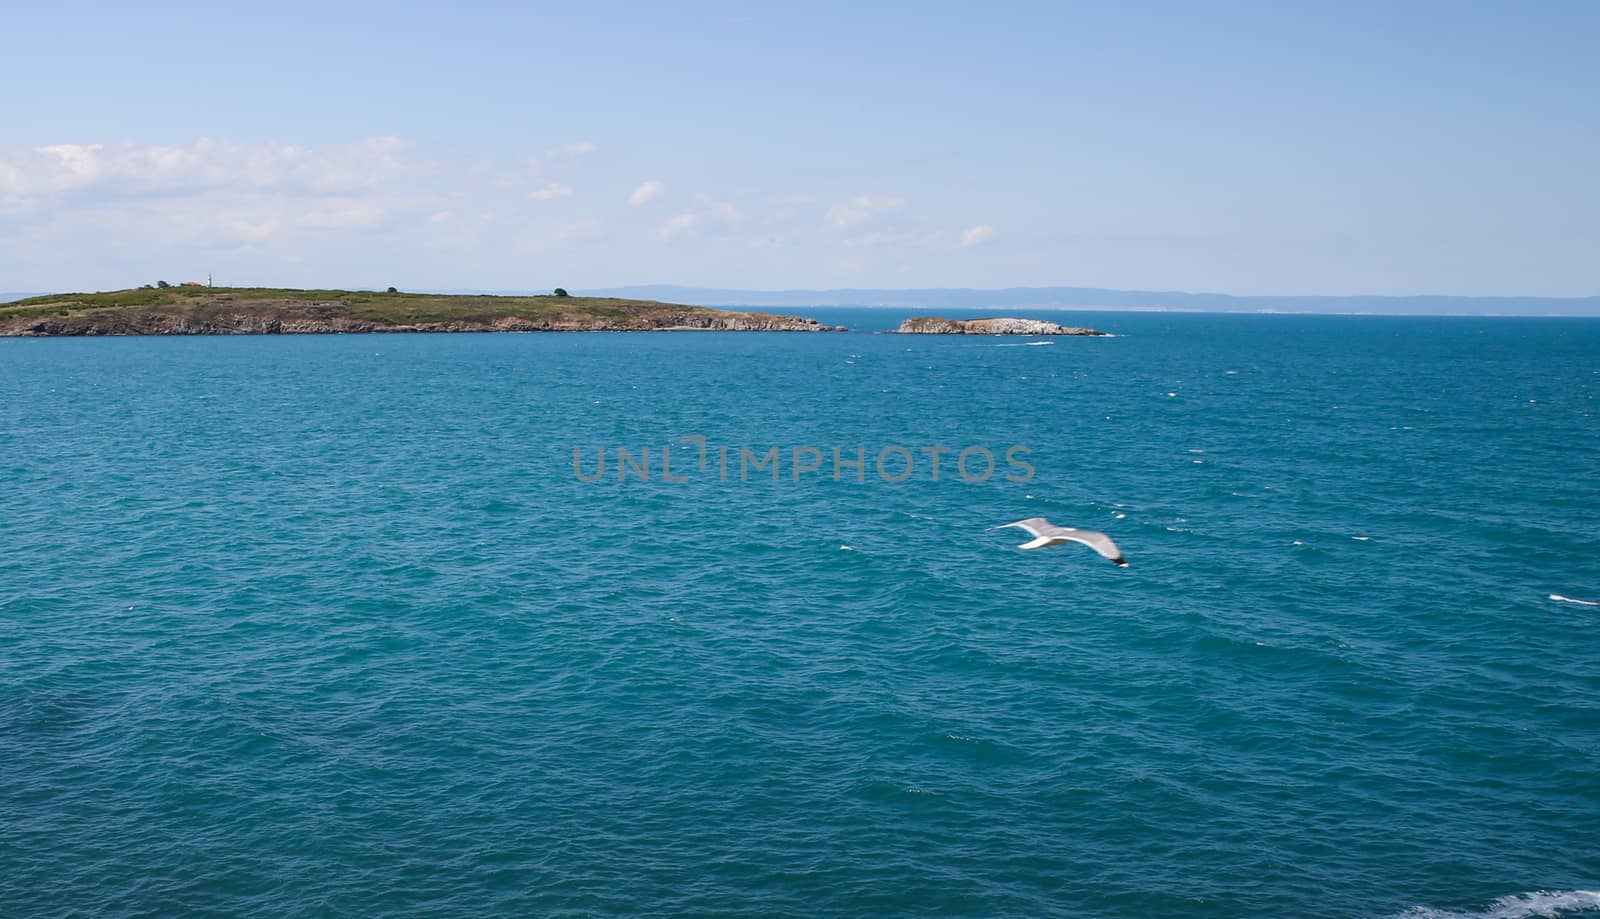 seagull flying over the sea and the island can be seen in the distance